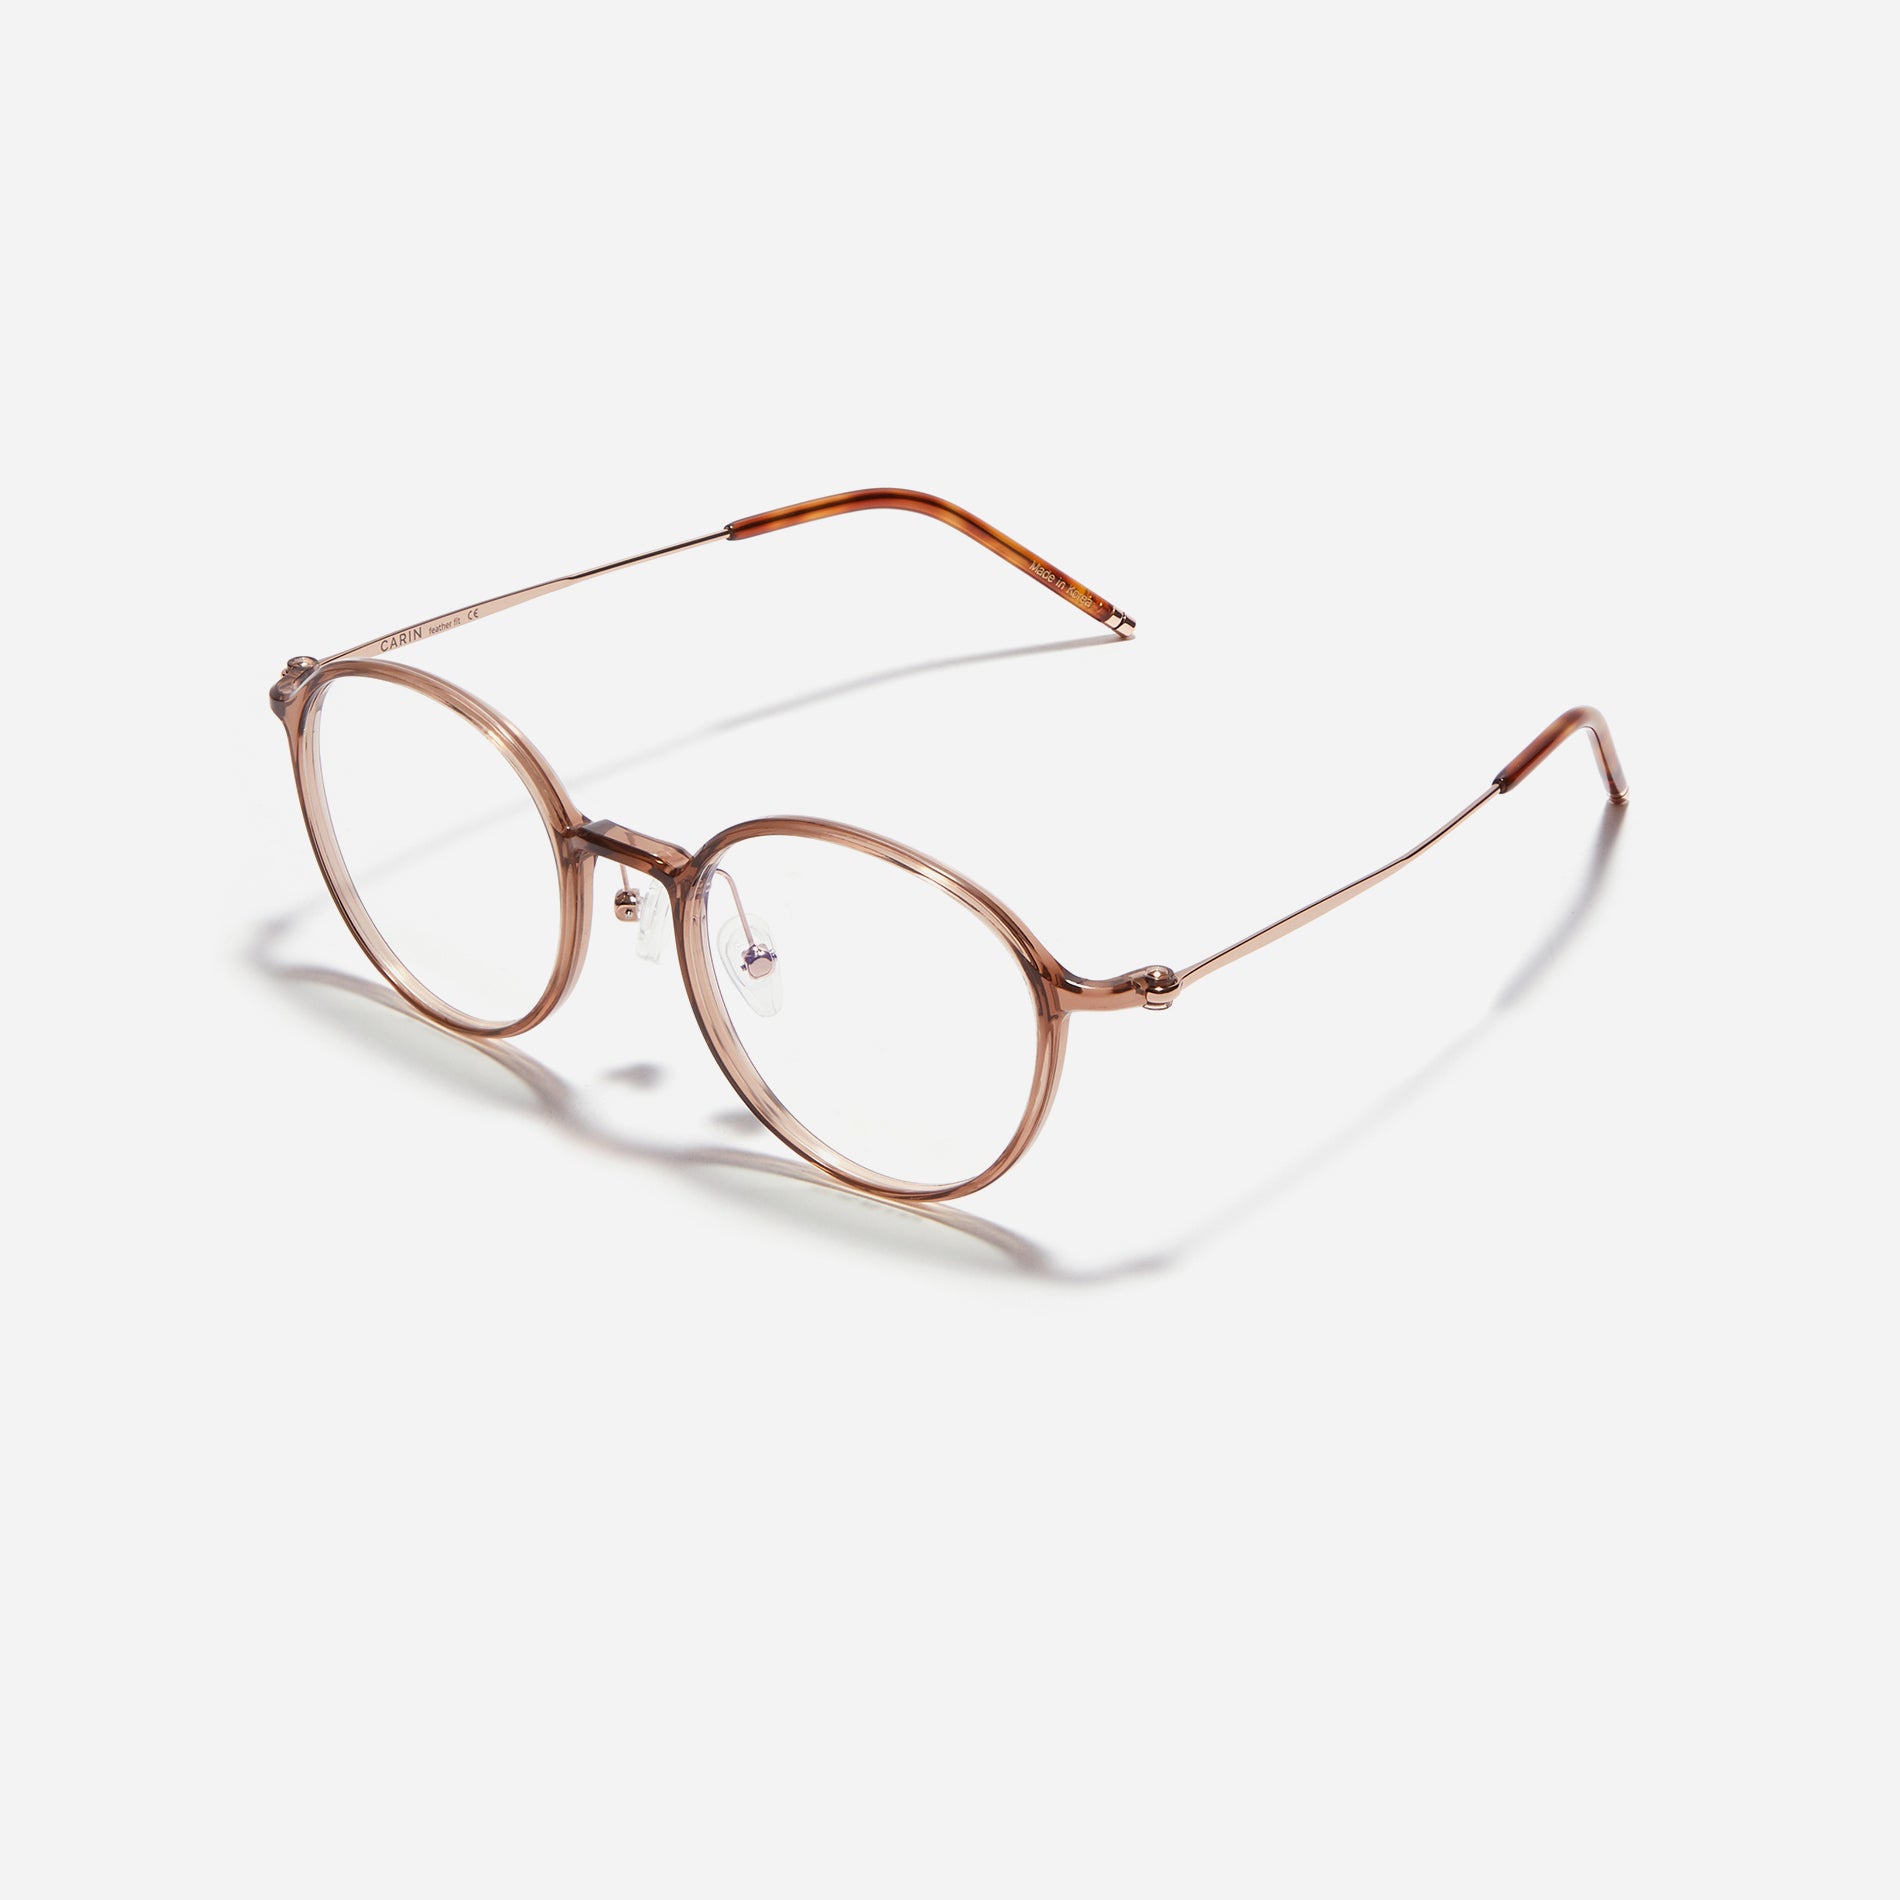 Ultra-lightweight round-shaped eyeglasses crafted using cutting-edge materials sourced from the French company ARKEMA. These glasses offer robust durability and consistently comfortable fit.